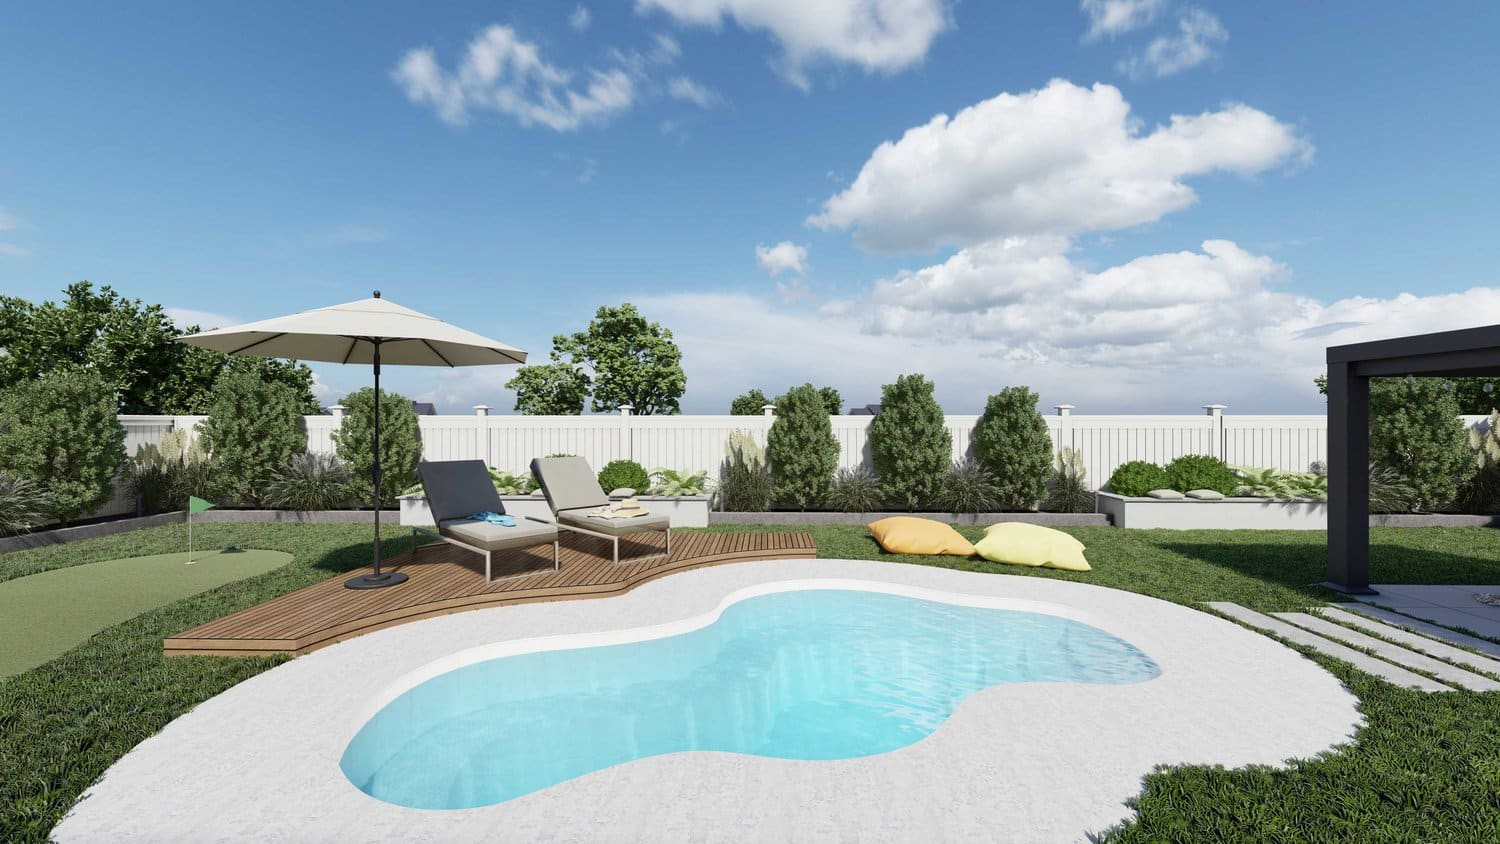 Twin Falls backyard with swimming pool and decked seating area with sunbrella and swim benches